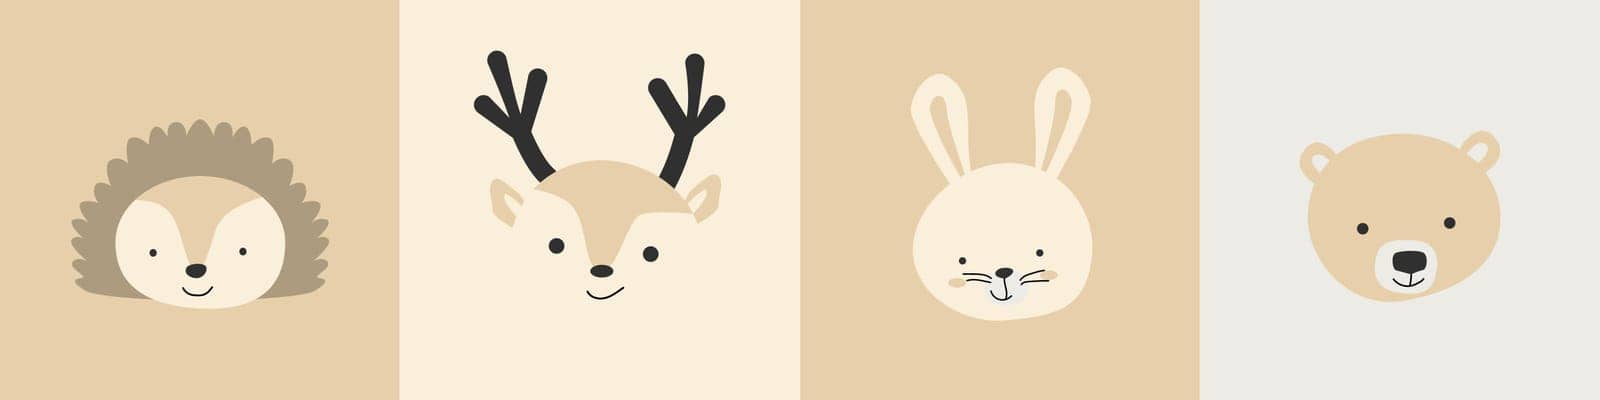 cute woodland animal portraits heads. Vector illustration in flat style. Cute animal faces can use for print, poster, nursery textile, clothes. Pastel brown colors.